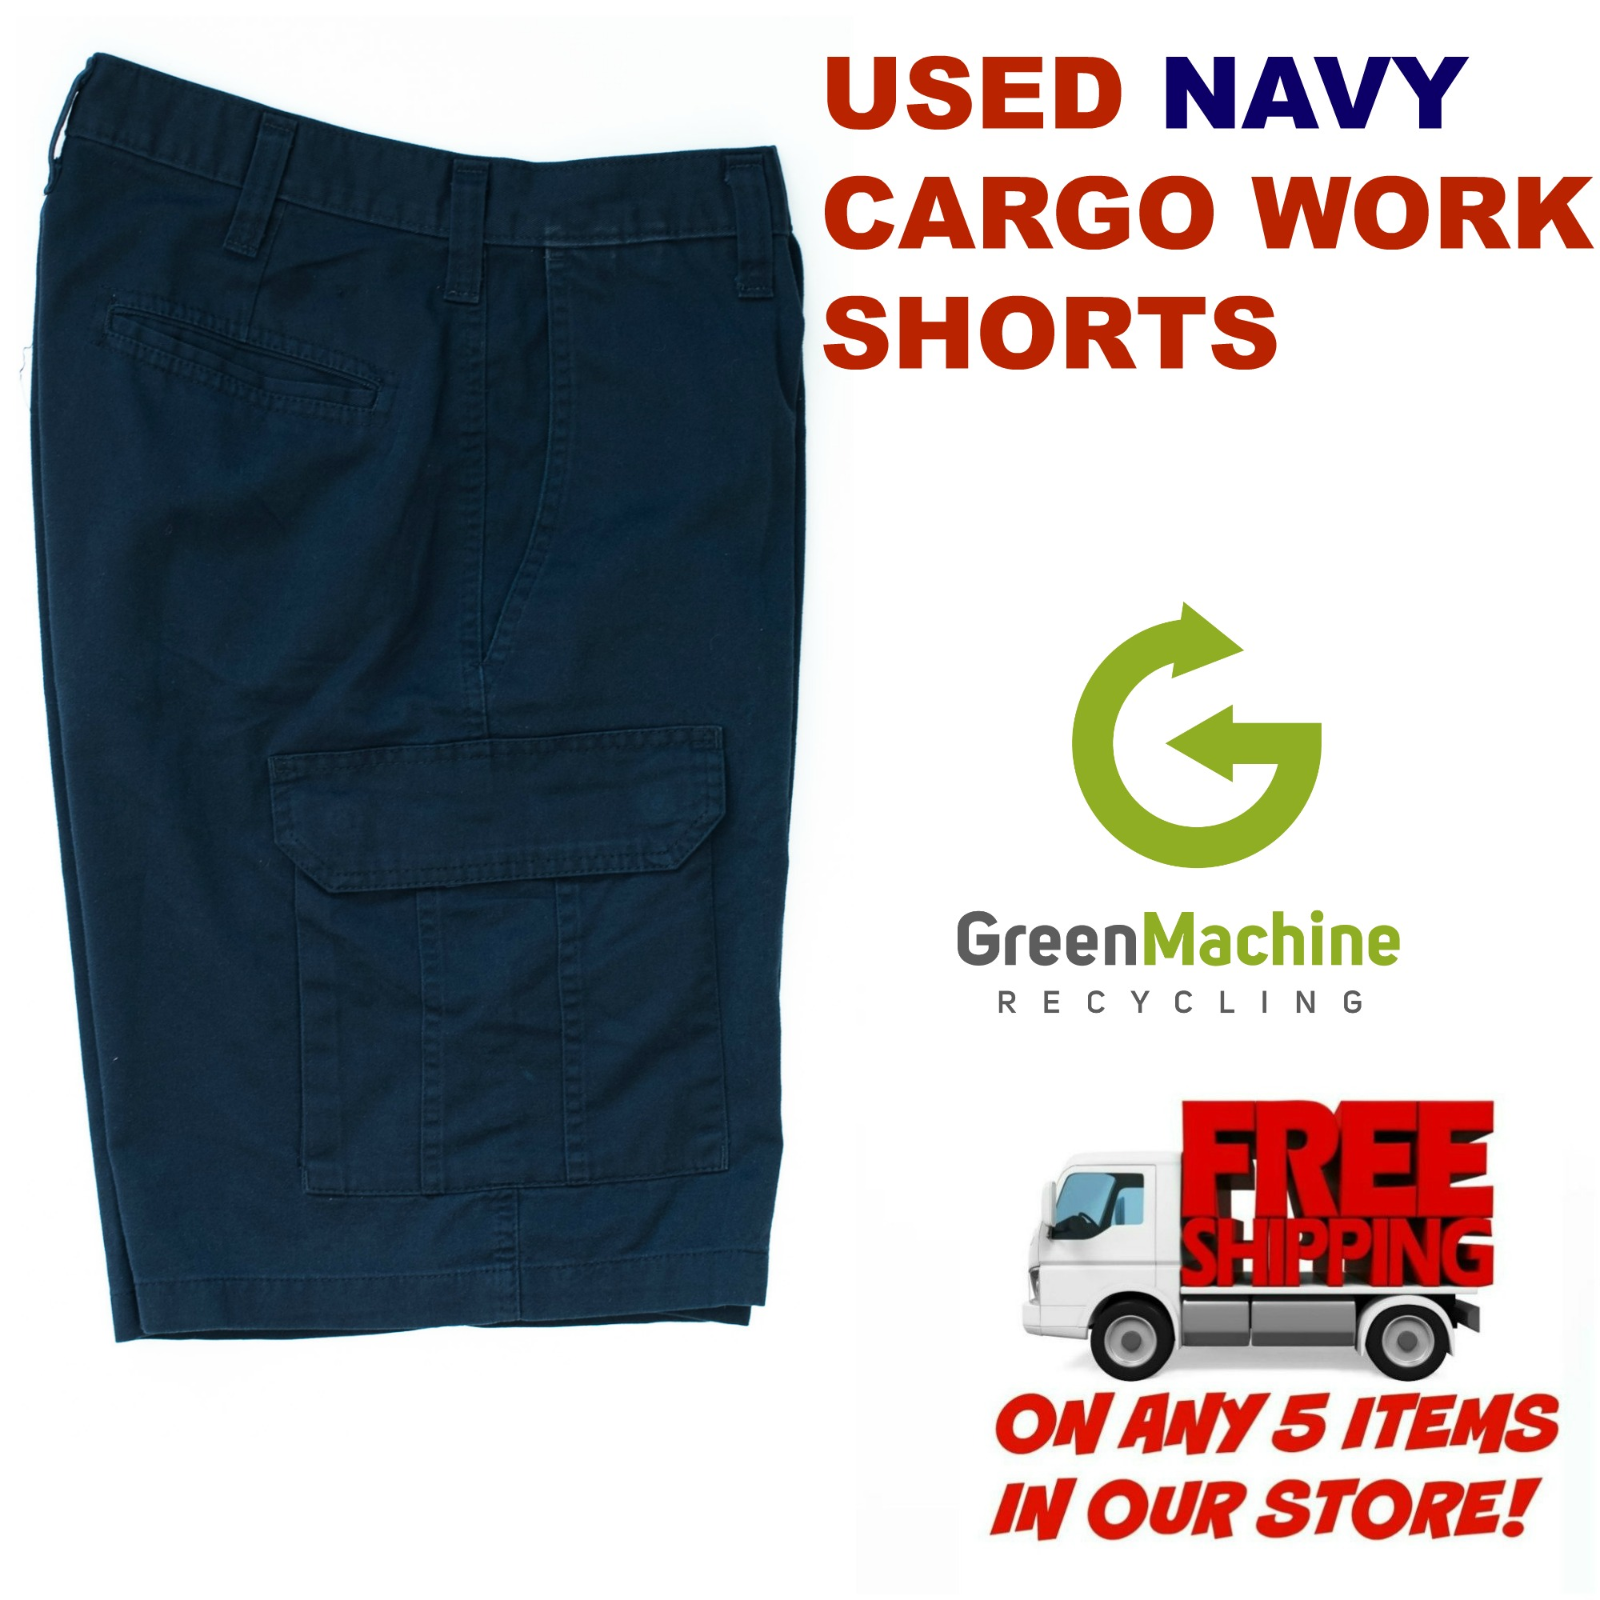 Used Cargo Work Shorts Cintas, Redkap, Unifirst, G&k, Dickies And Others Navy